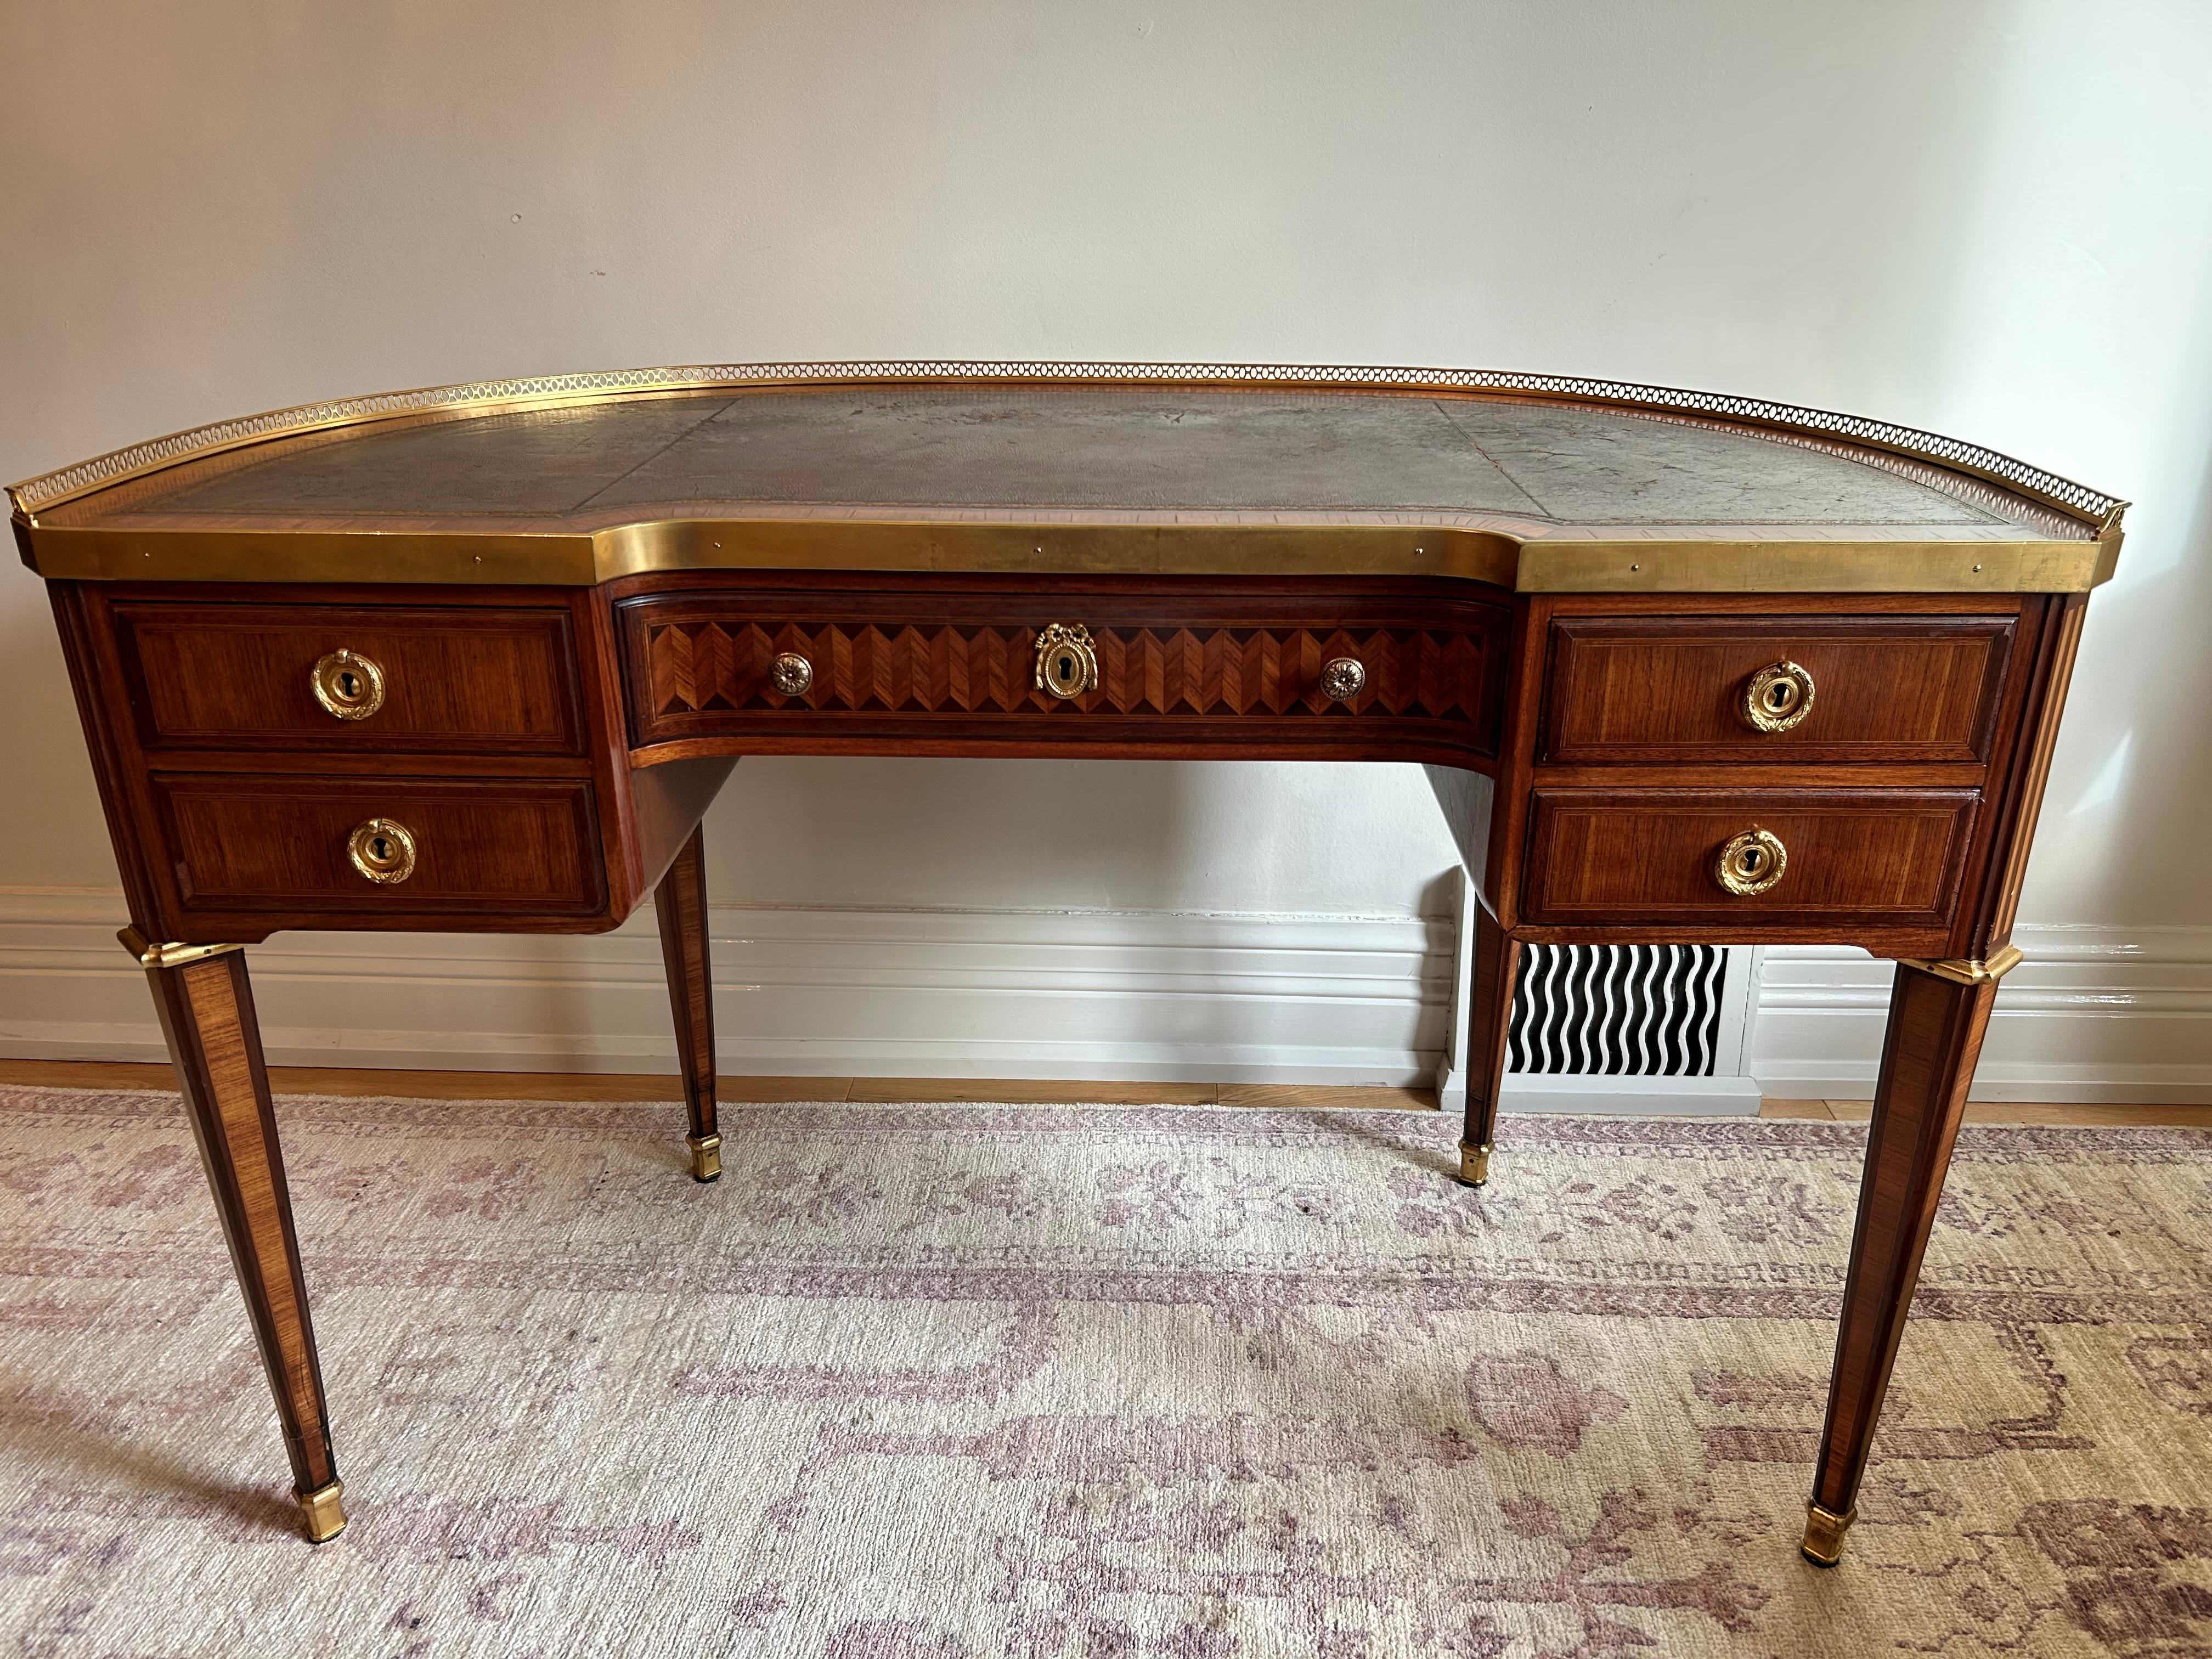 Late Nineteenth century kidney shaped desk in the stule of Louis XVI. Exquisite marquetry  on the front drawers and throughout, with book matched satinwood veneers on the back. Gilt bronze galleried top and banding. Tapered legs ending in bronze